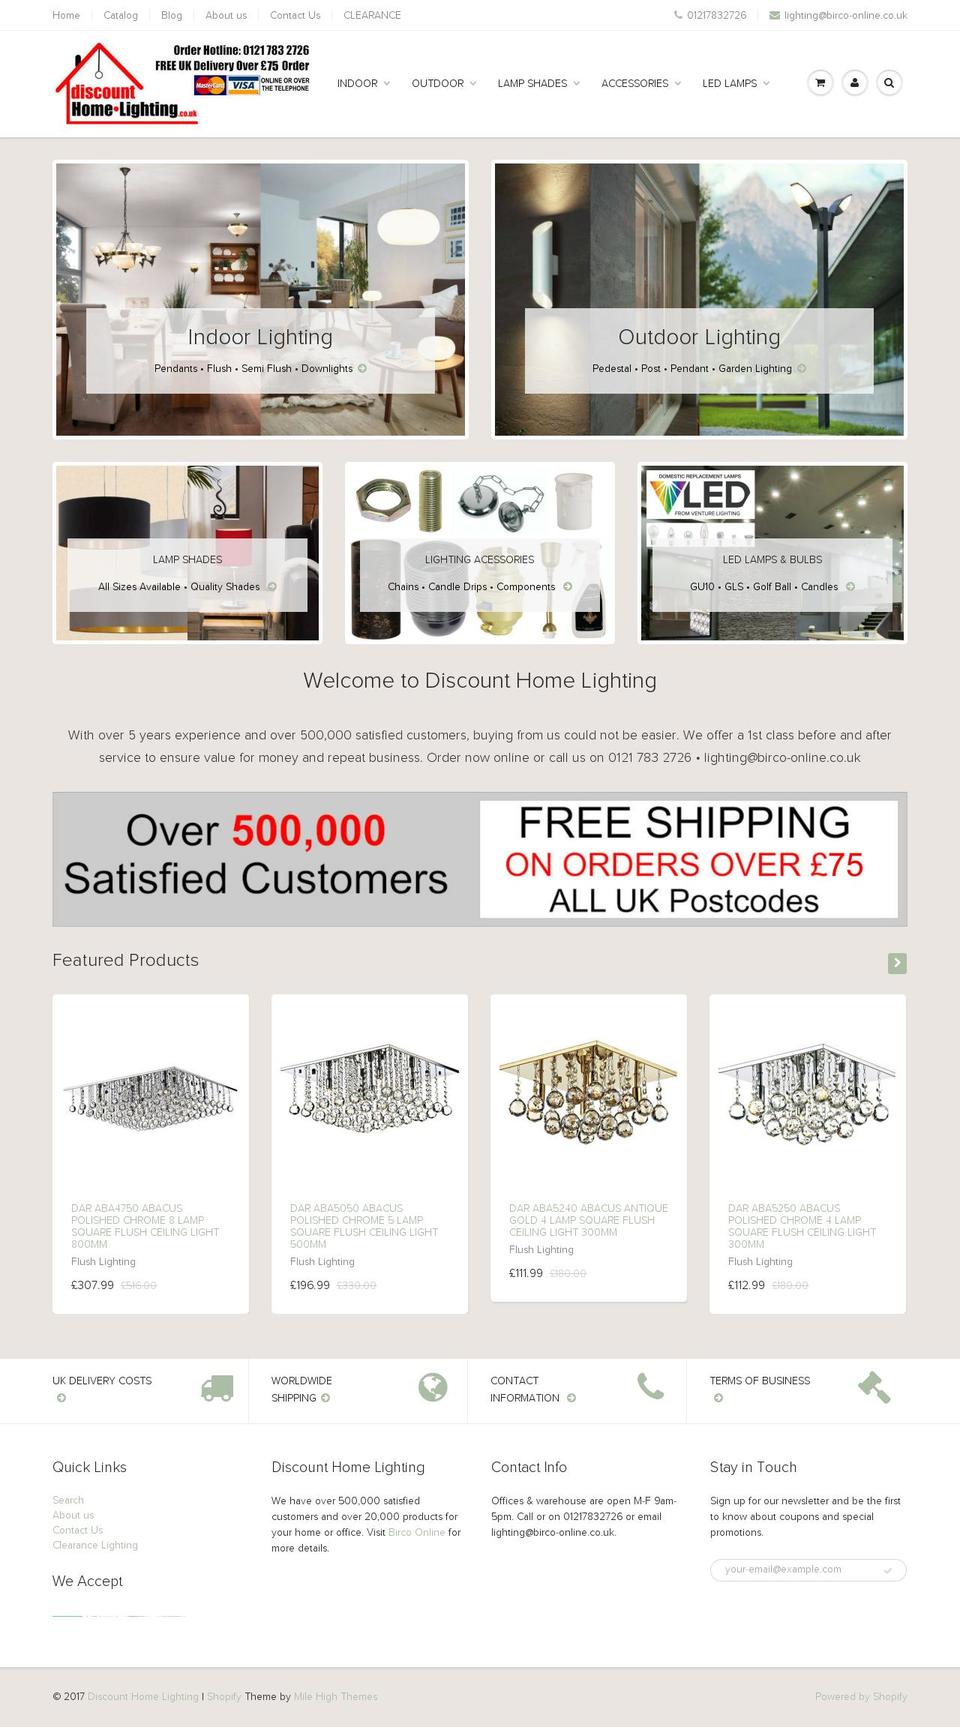 Ella Shopify theme site example discounthomelighting.co.uk